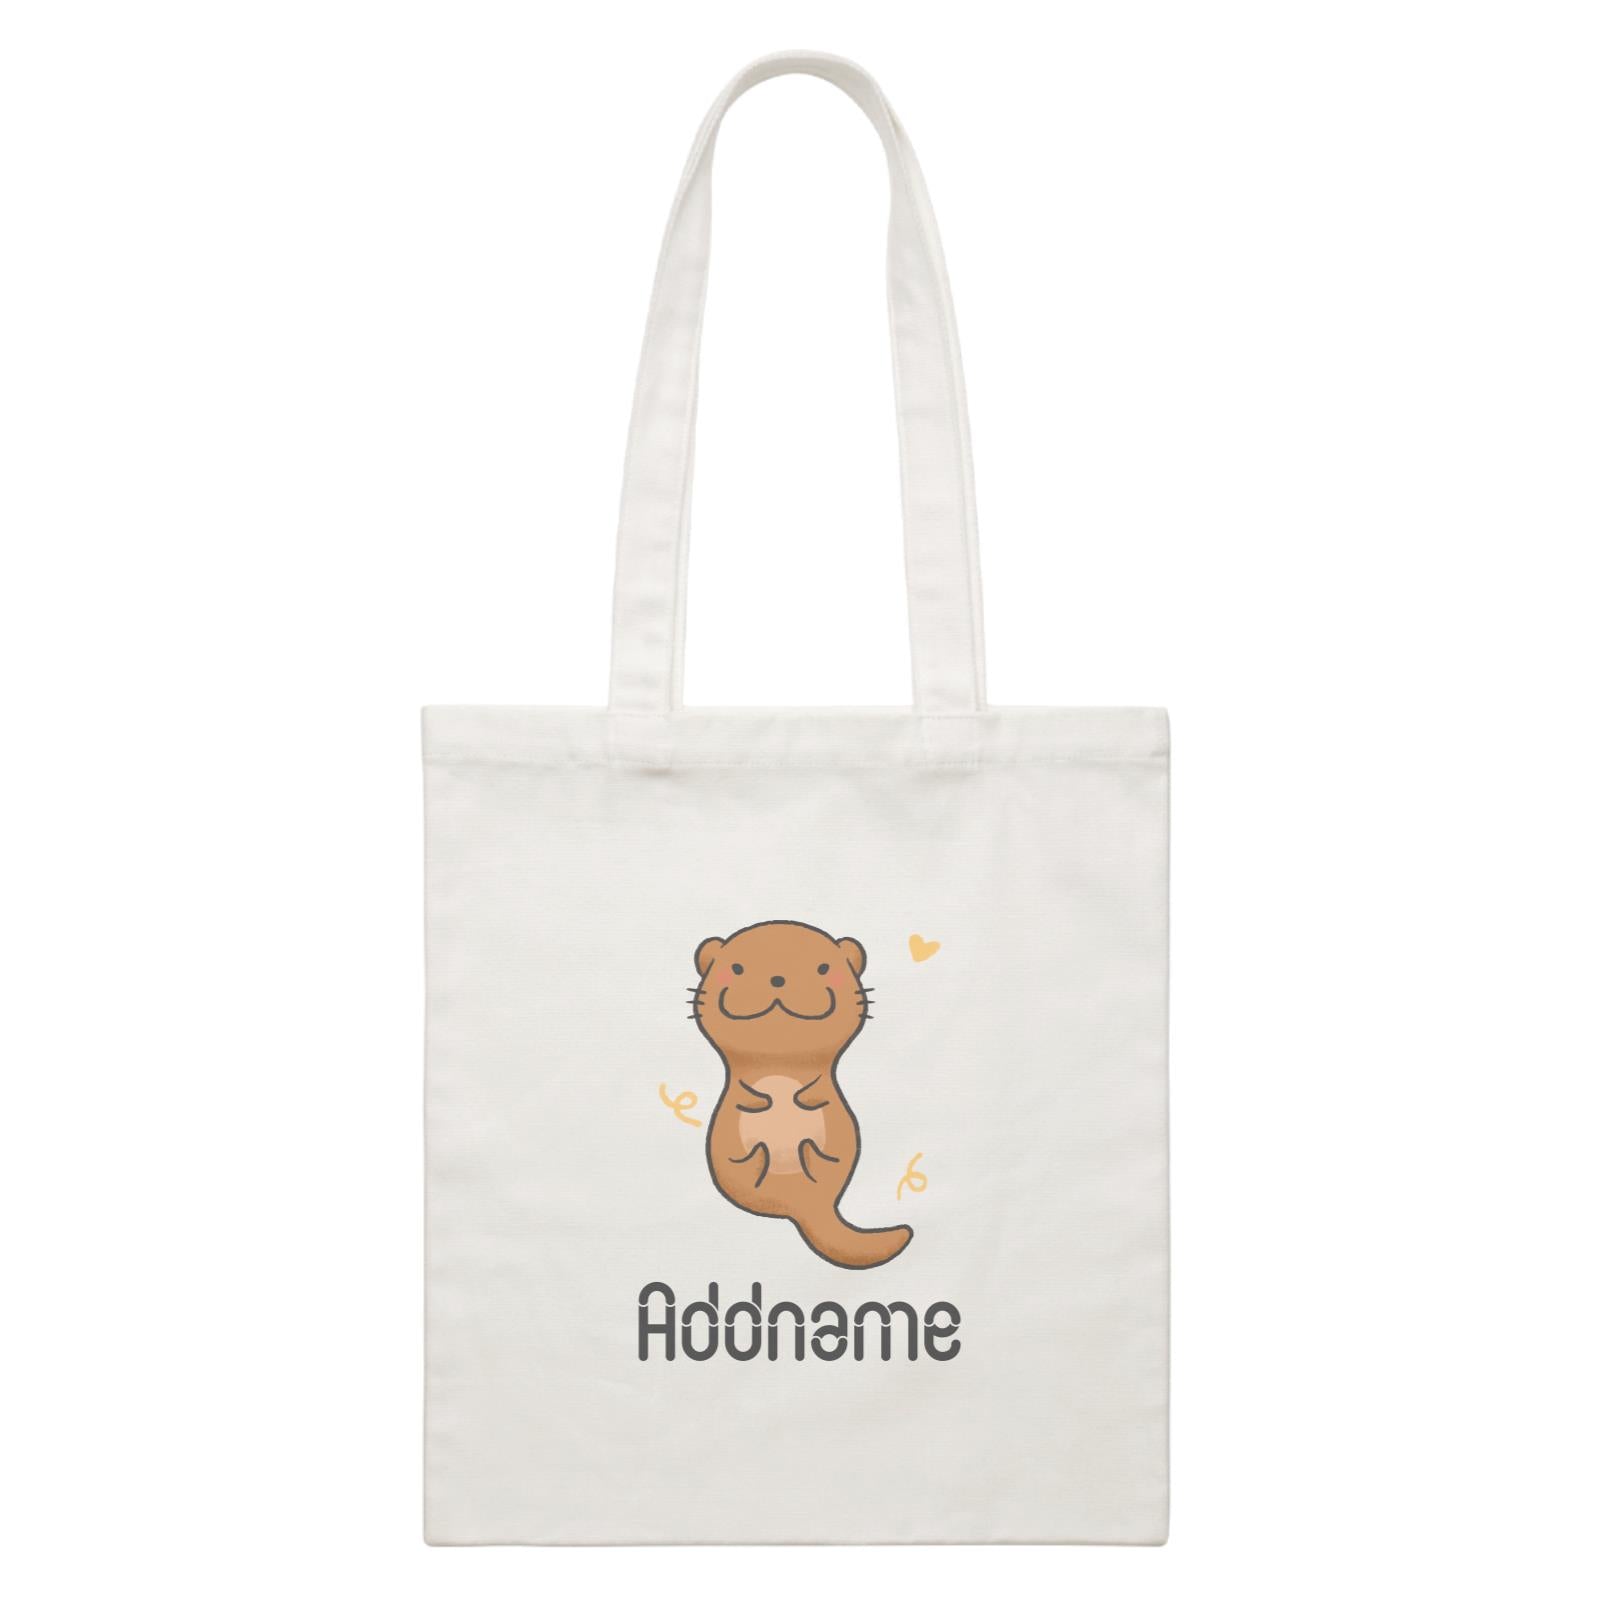 Cute Hand Drawn Style Otter Addname White Canvas Bag